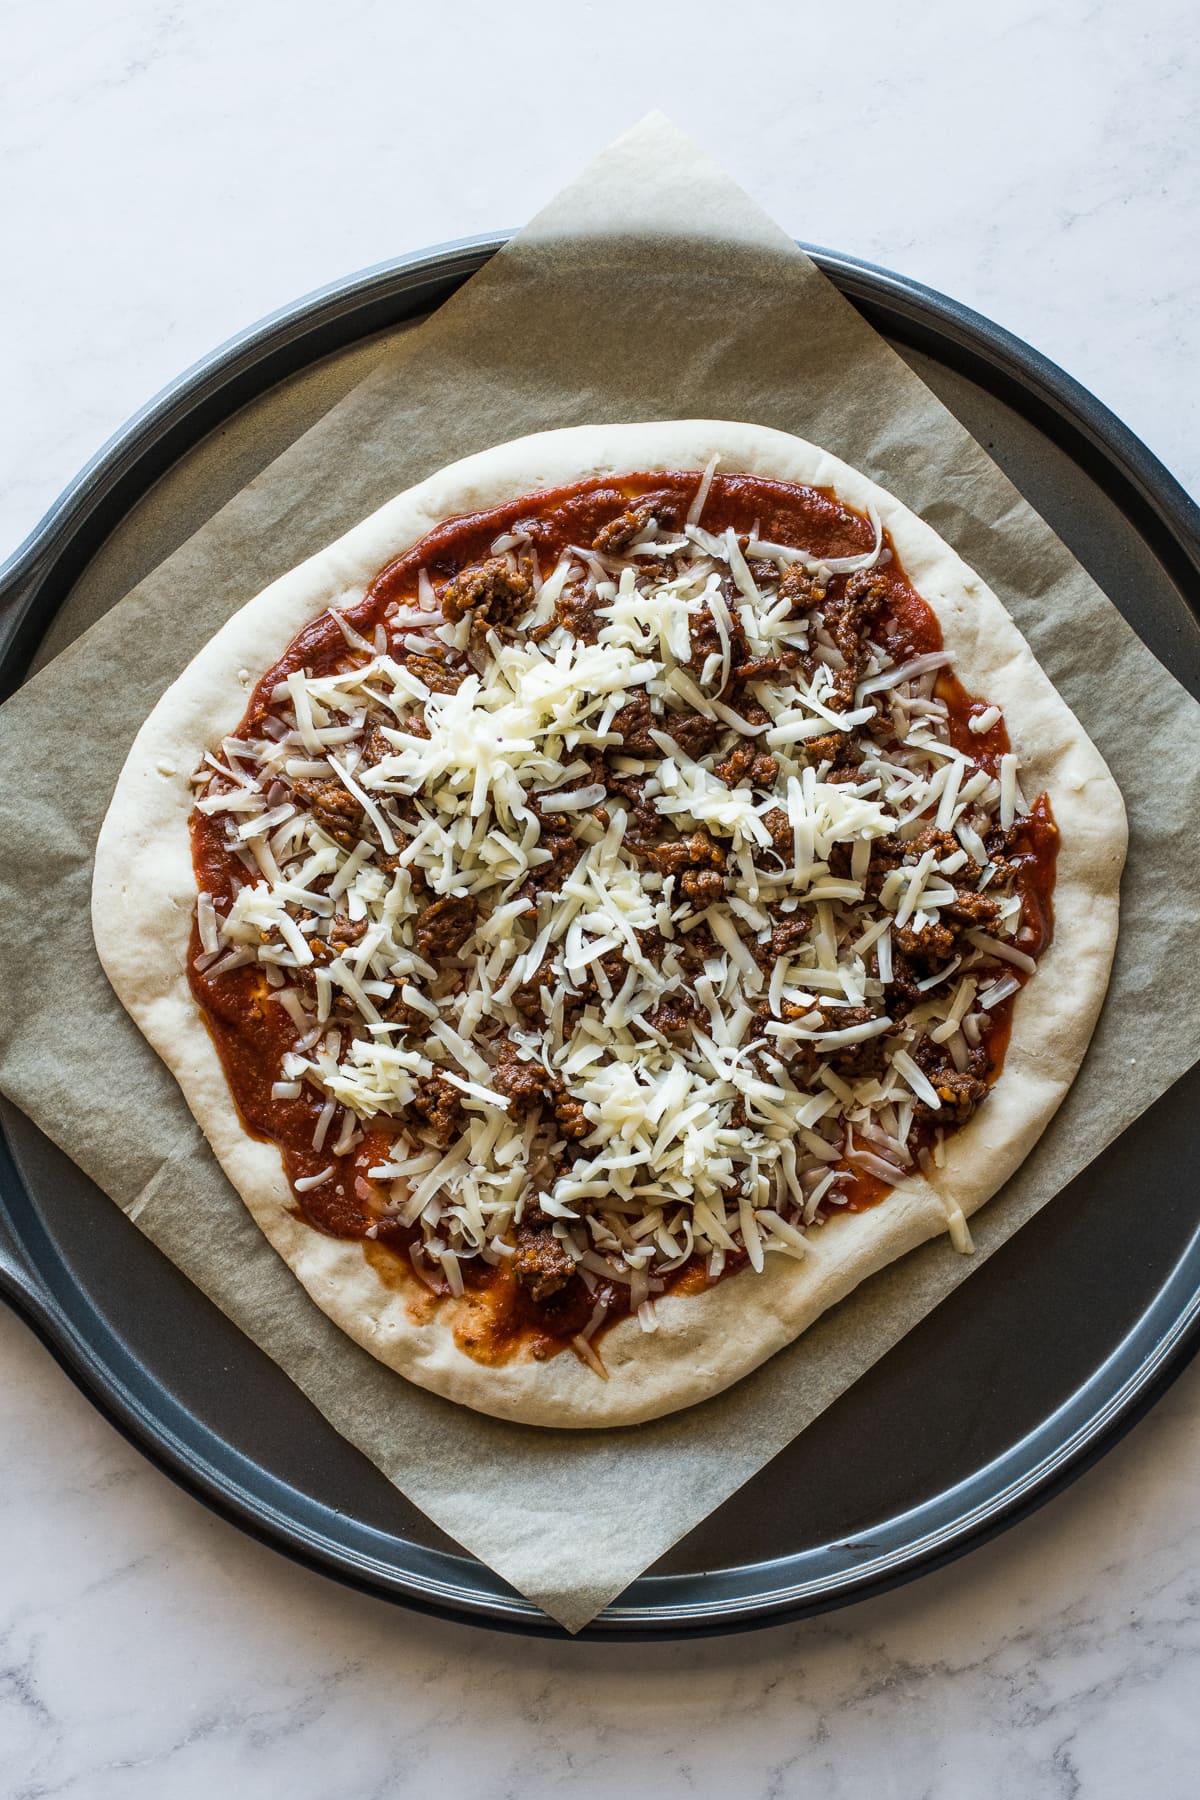 Chipotle tomato sauce on a pizza crust topped with cheese and chorizo.